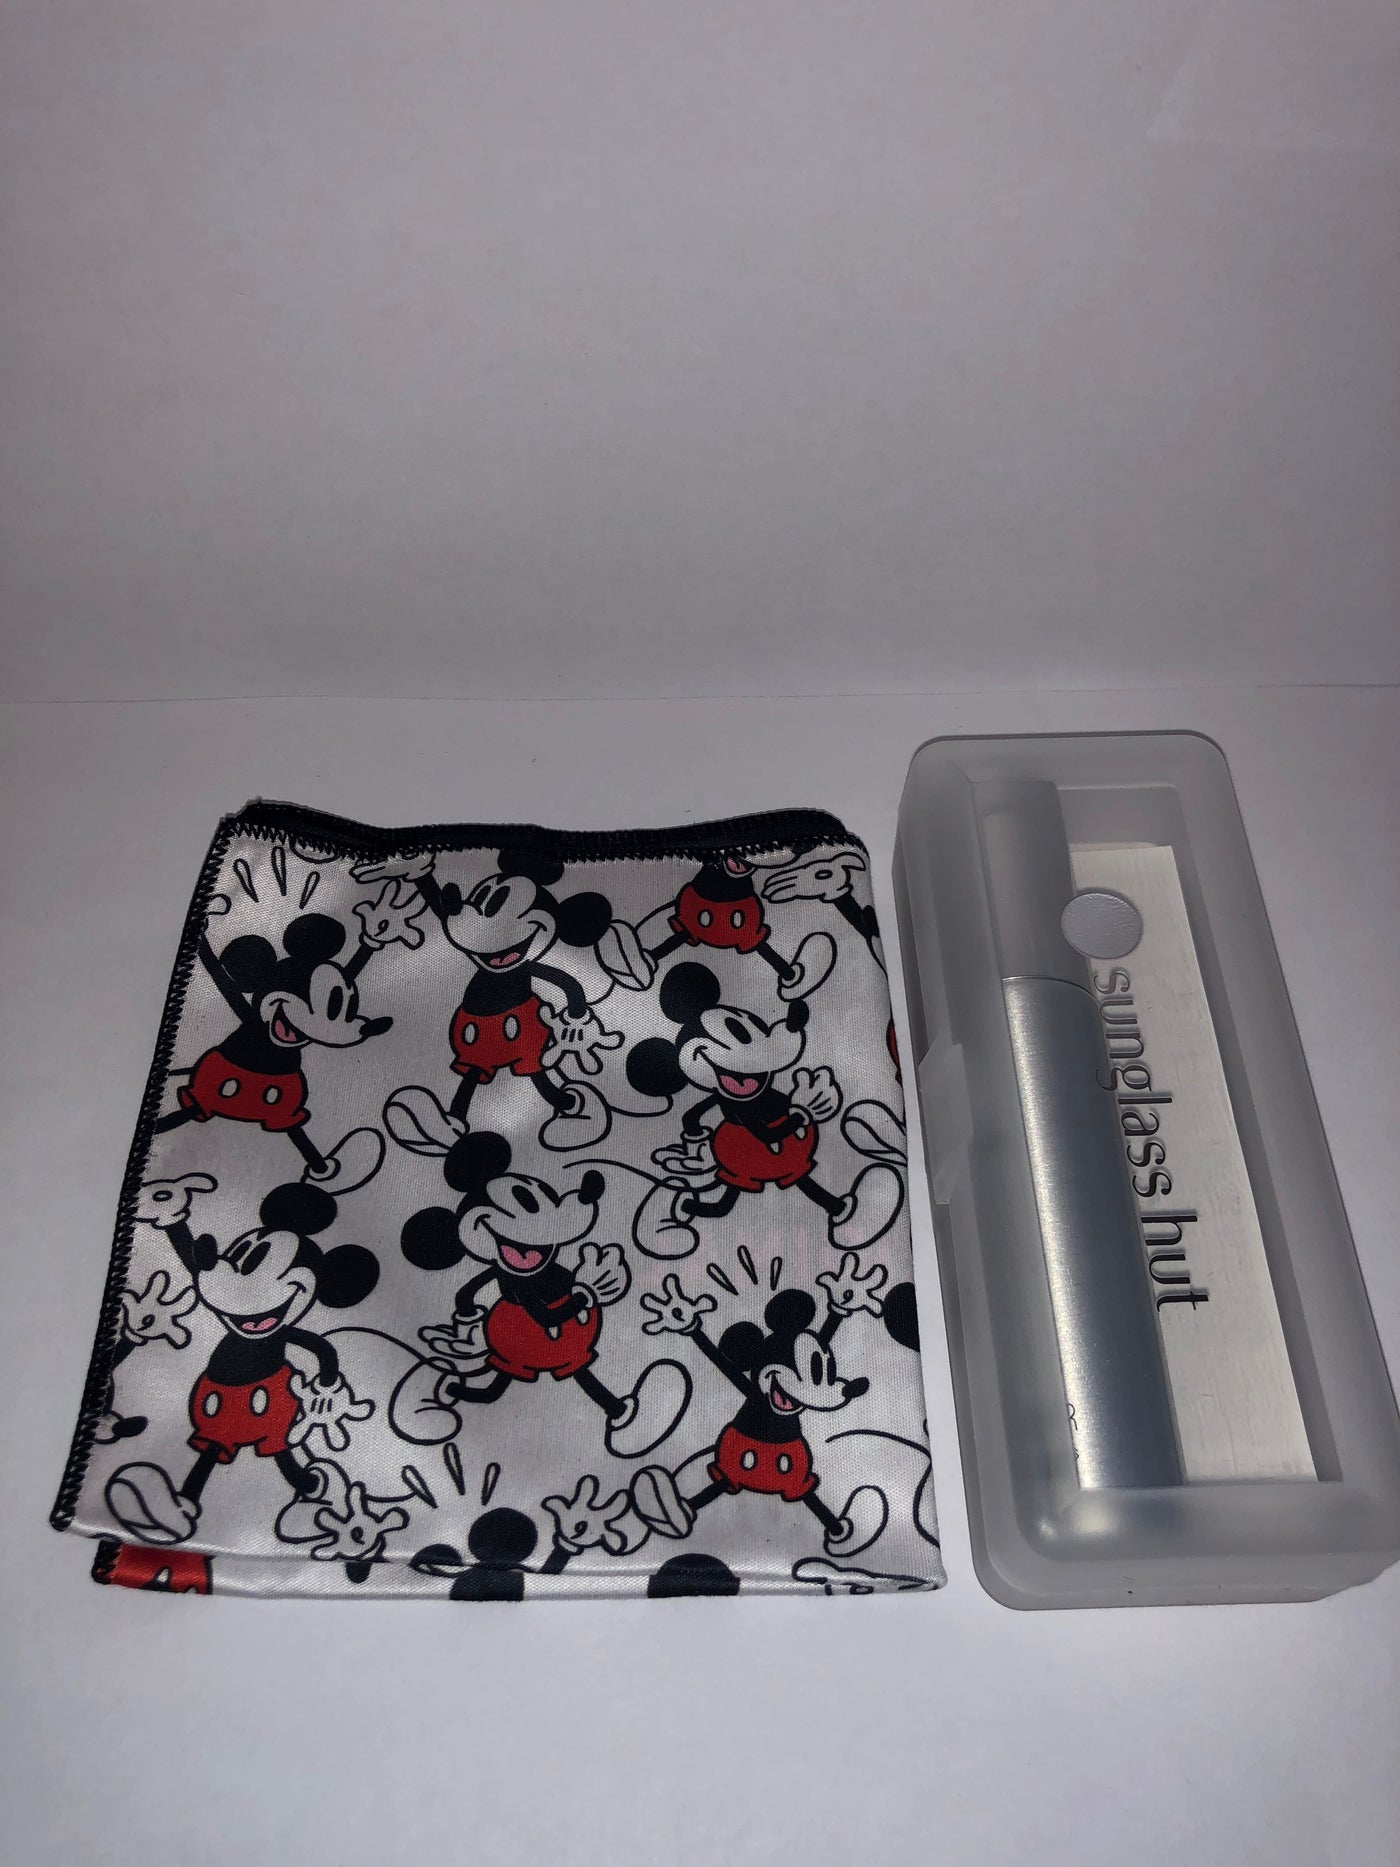 Disney 2018 Mickey 90th Sunglass Hut Limited Cleaning Cloth Kit New with Case